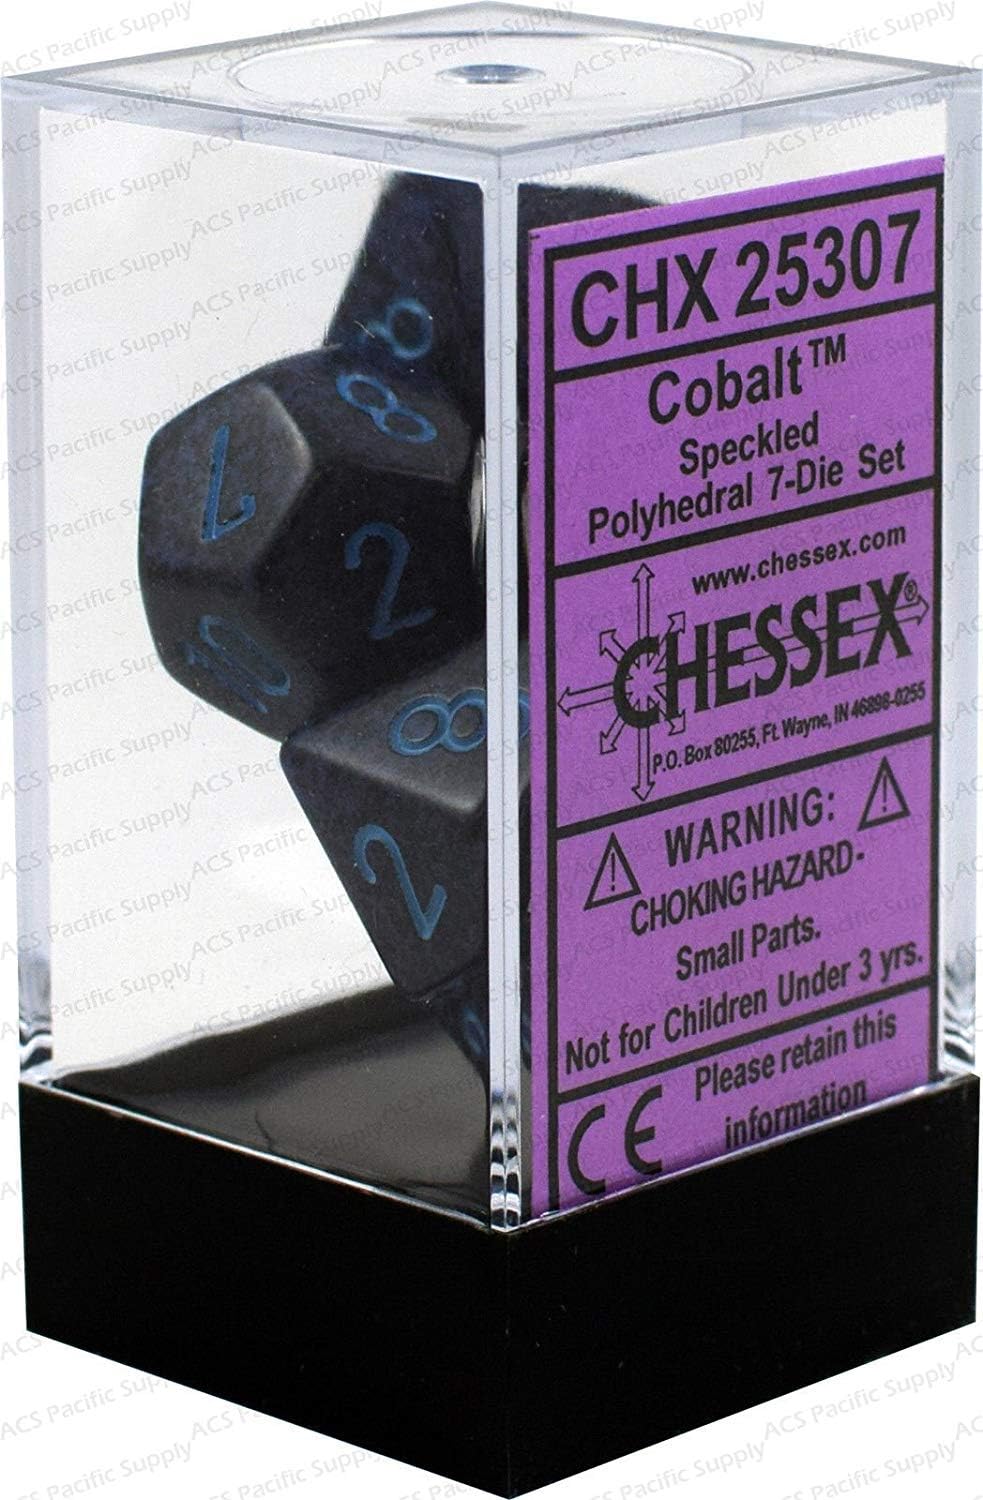 Chessex DND Dice Set-Chessex D&D Dice-16mm Speckled balt Plastic Polyhedral Dice Set-Dungeons and Dragons Dice ludes 7 Dice